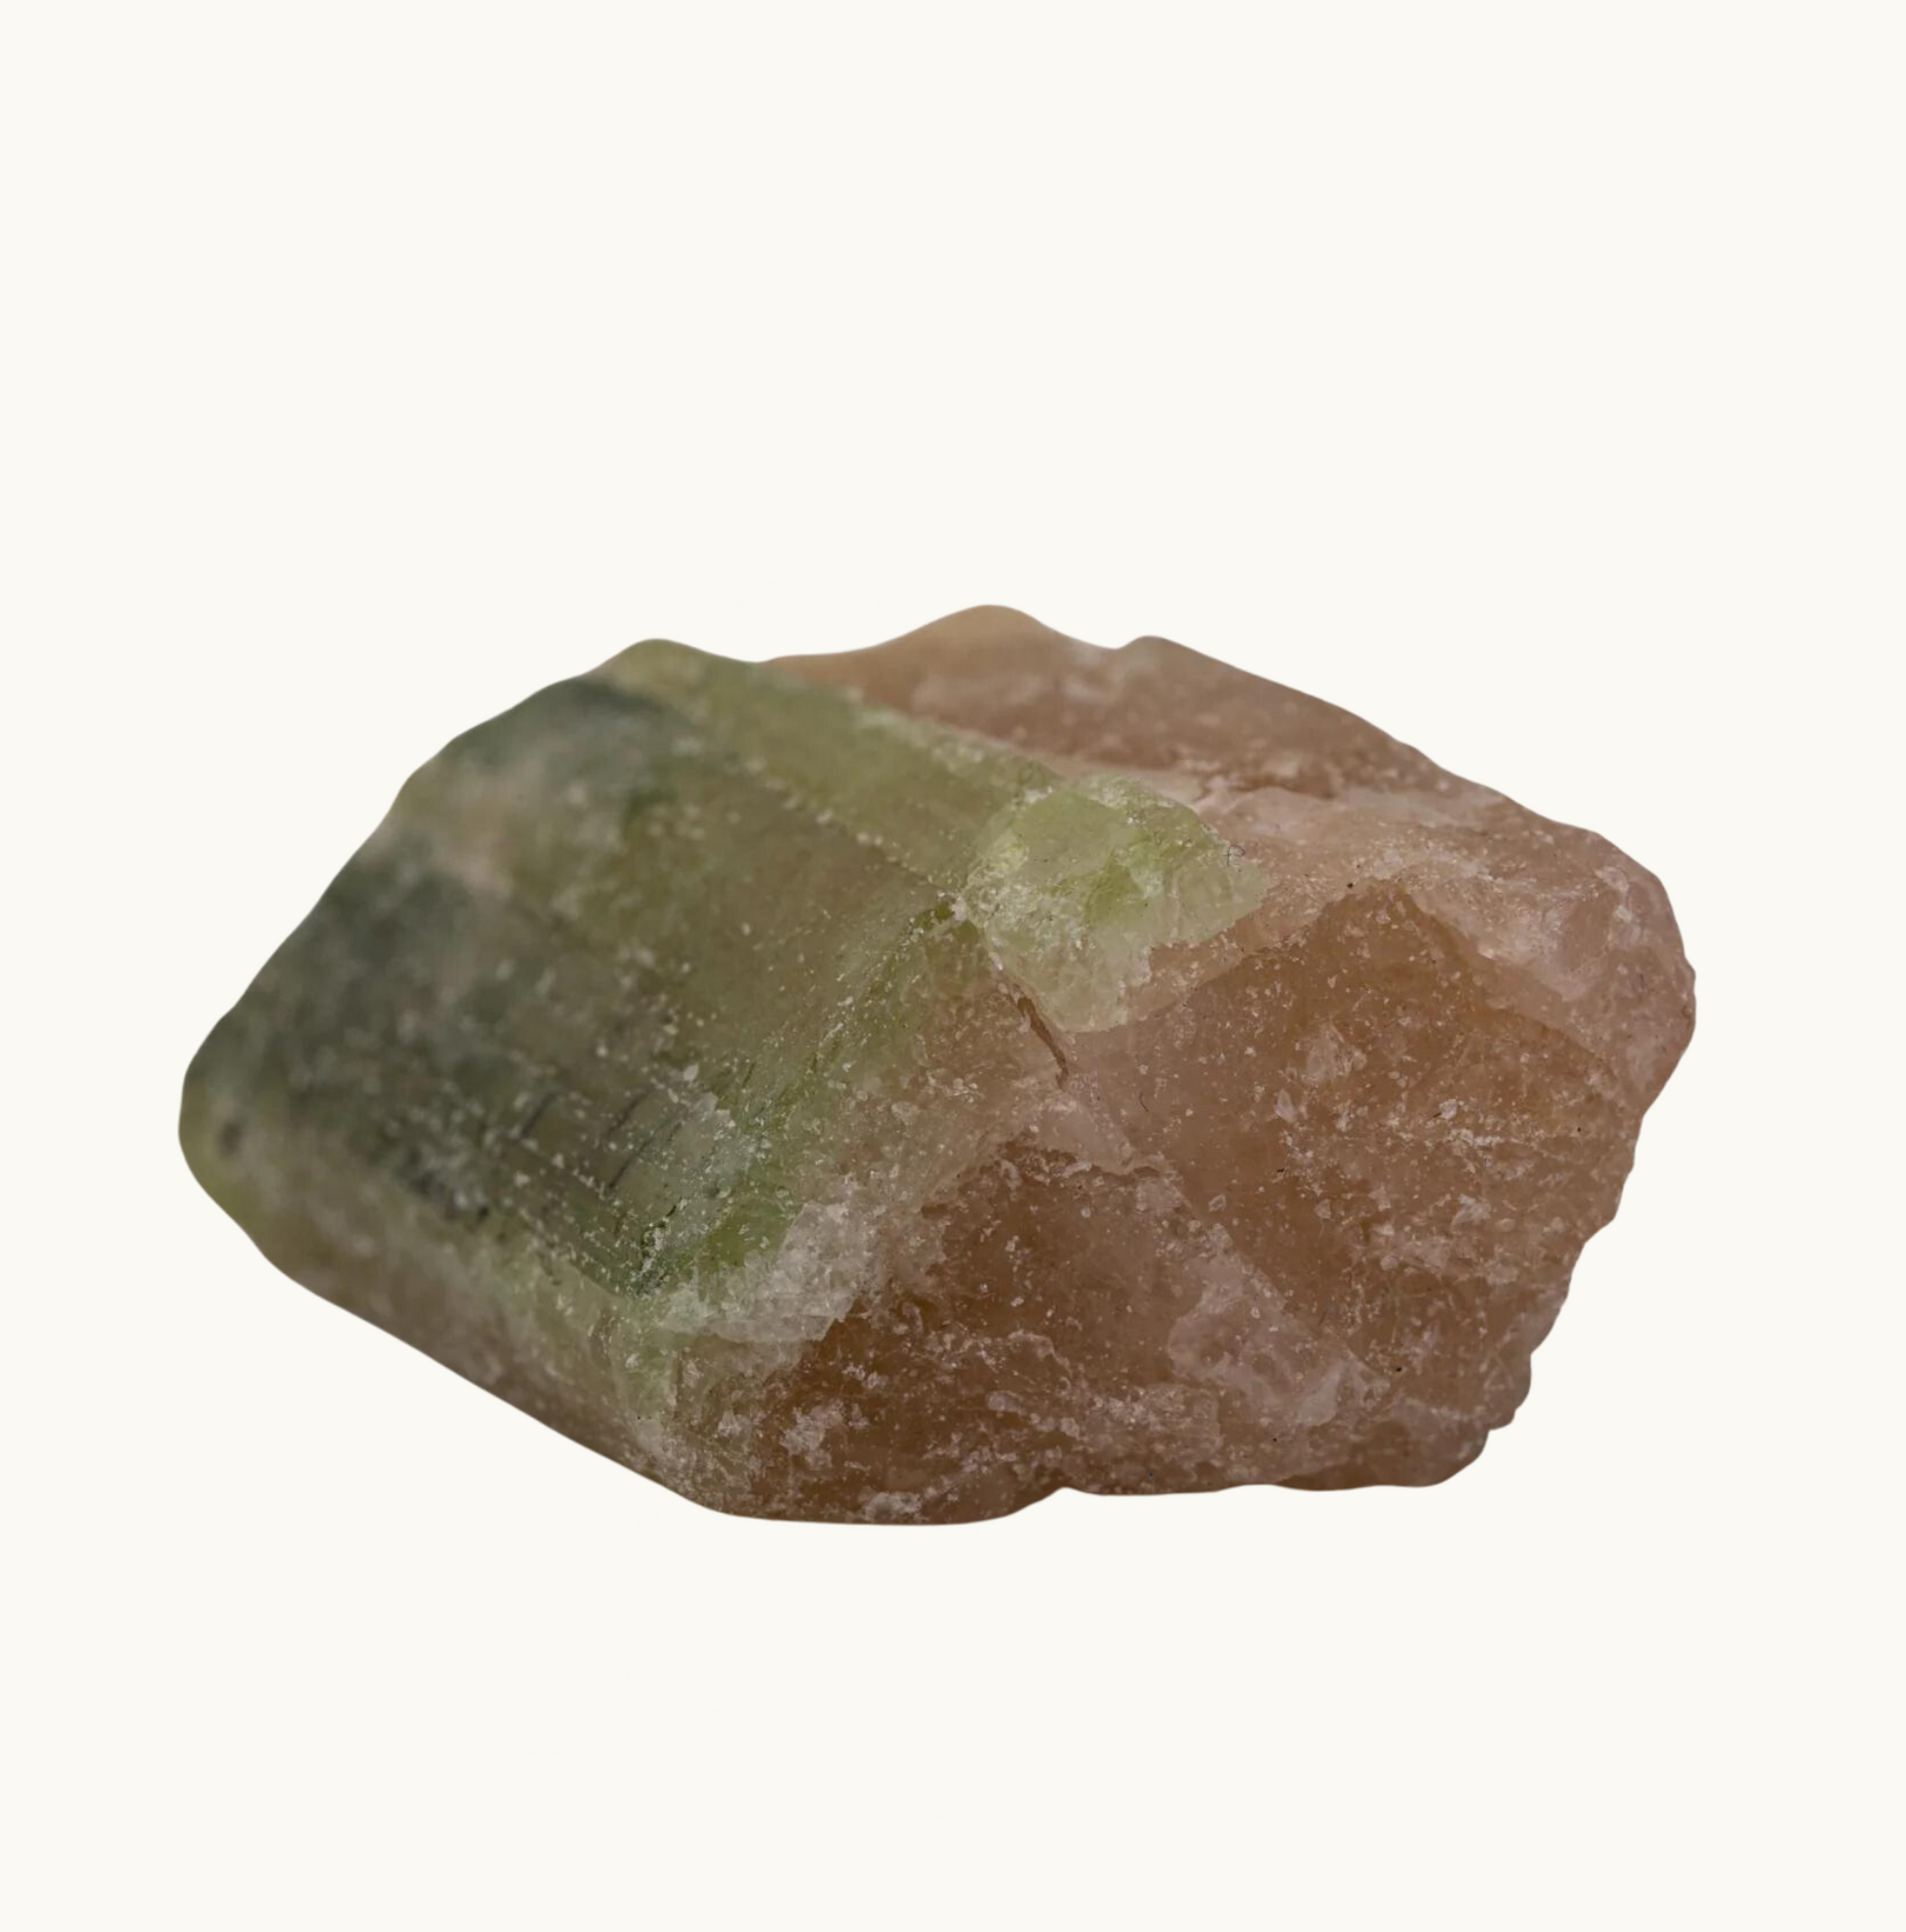 Image of pink and green tourmaline crystals